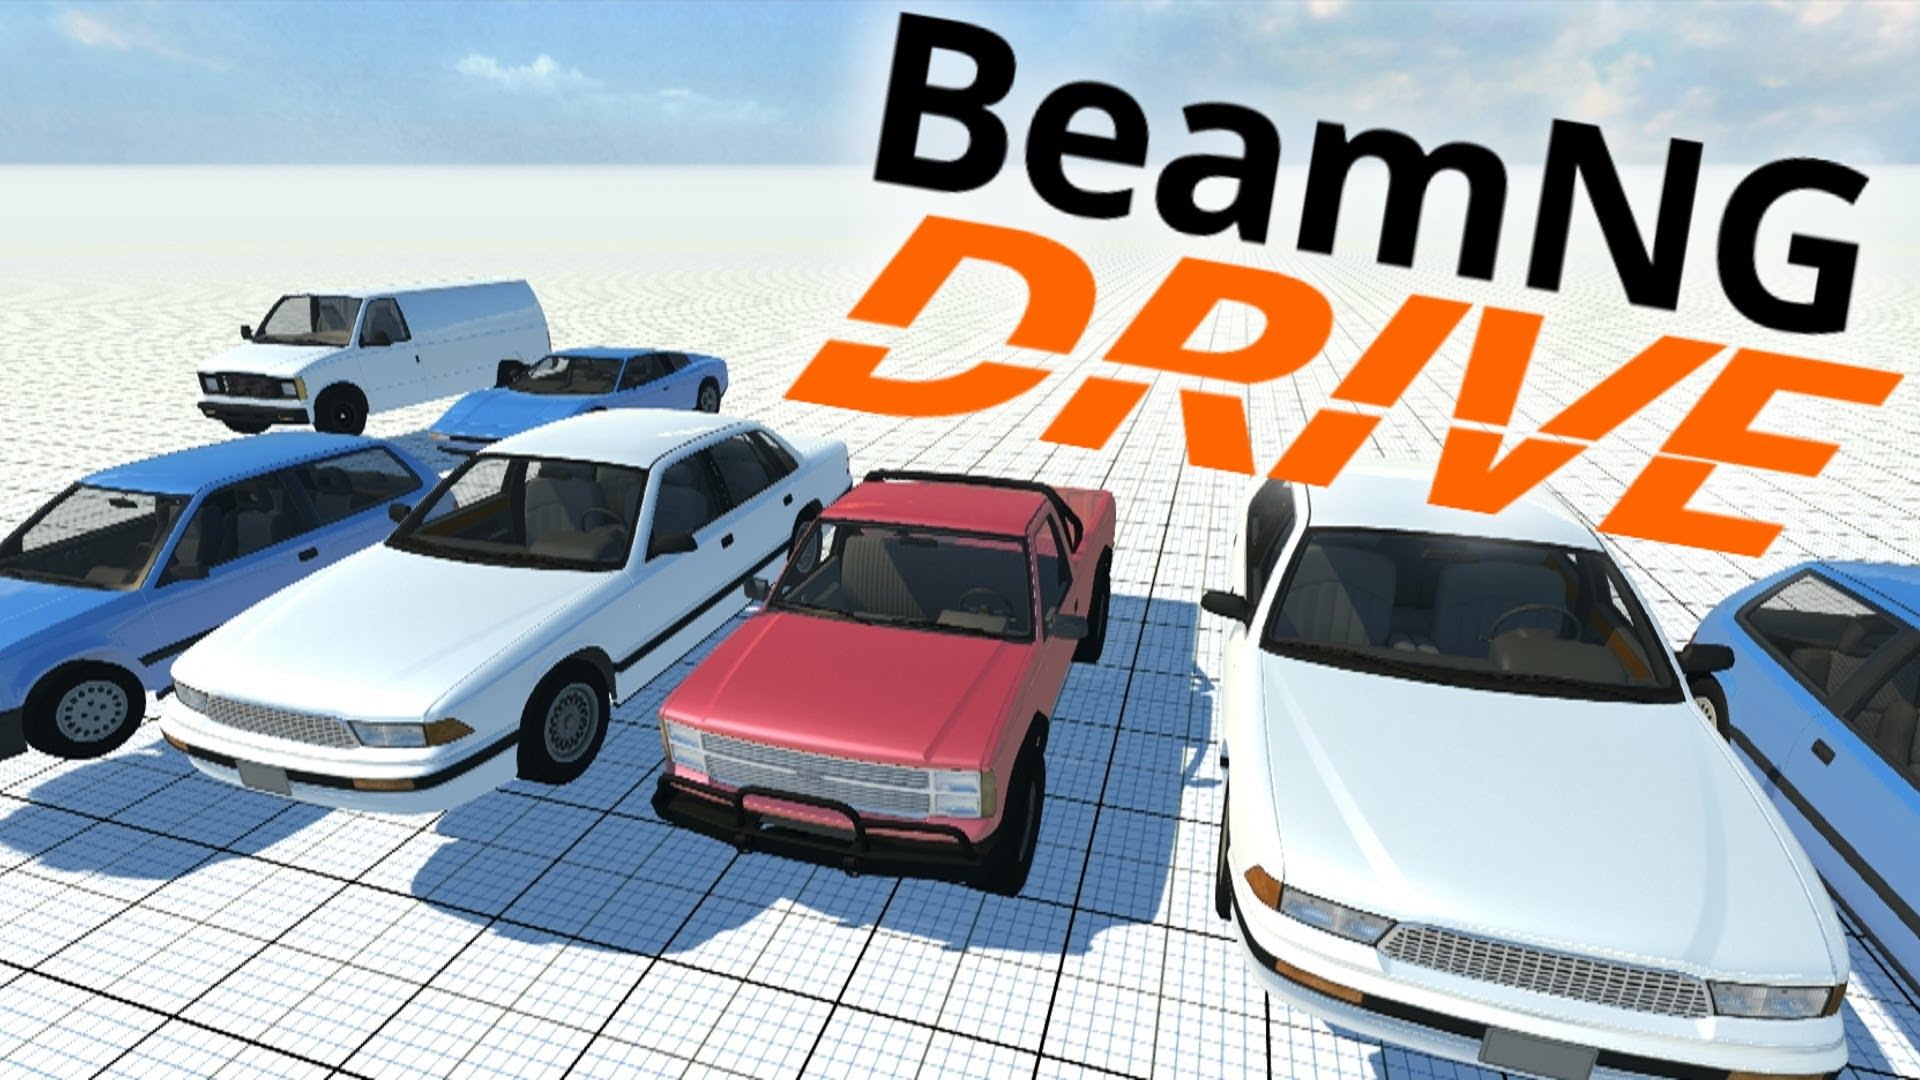 beam ng drive apk download for android